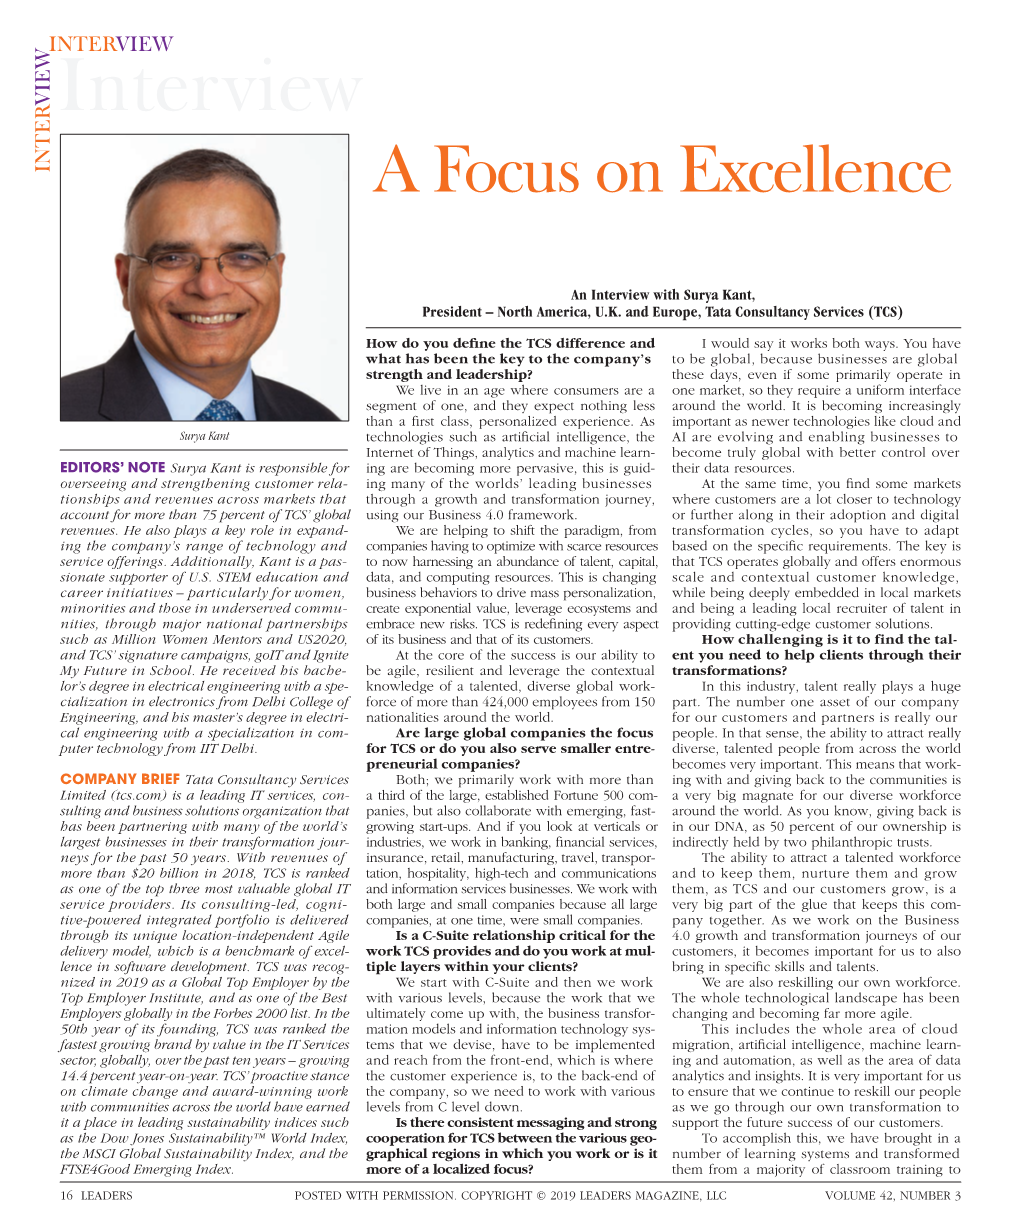 To Download a PDF of an Interview with Surya Kant, President